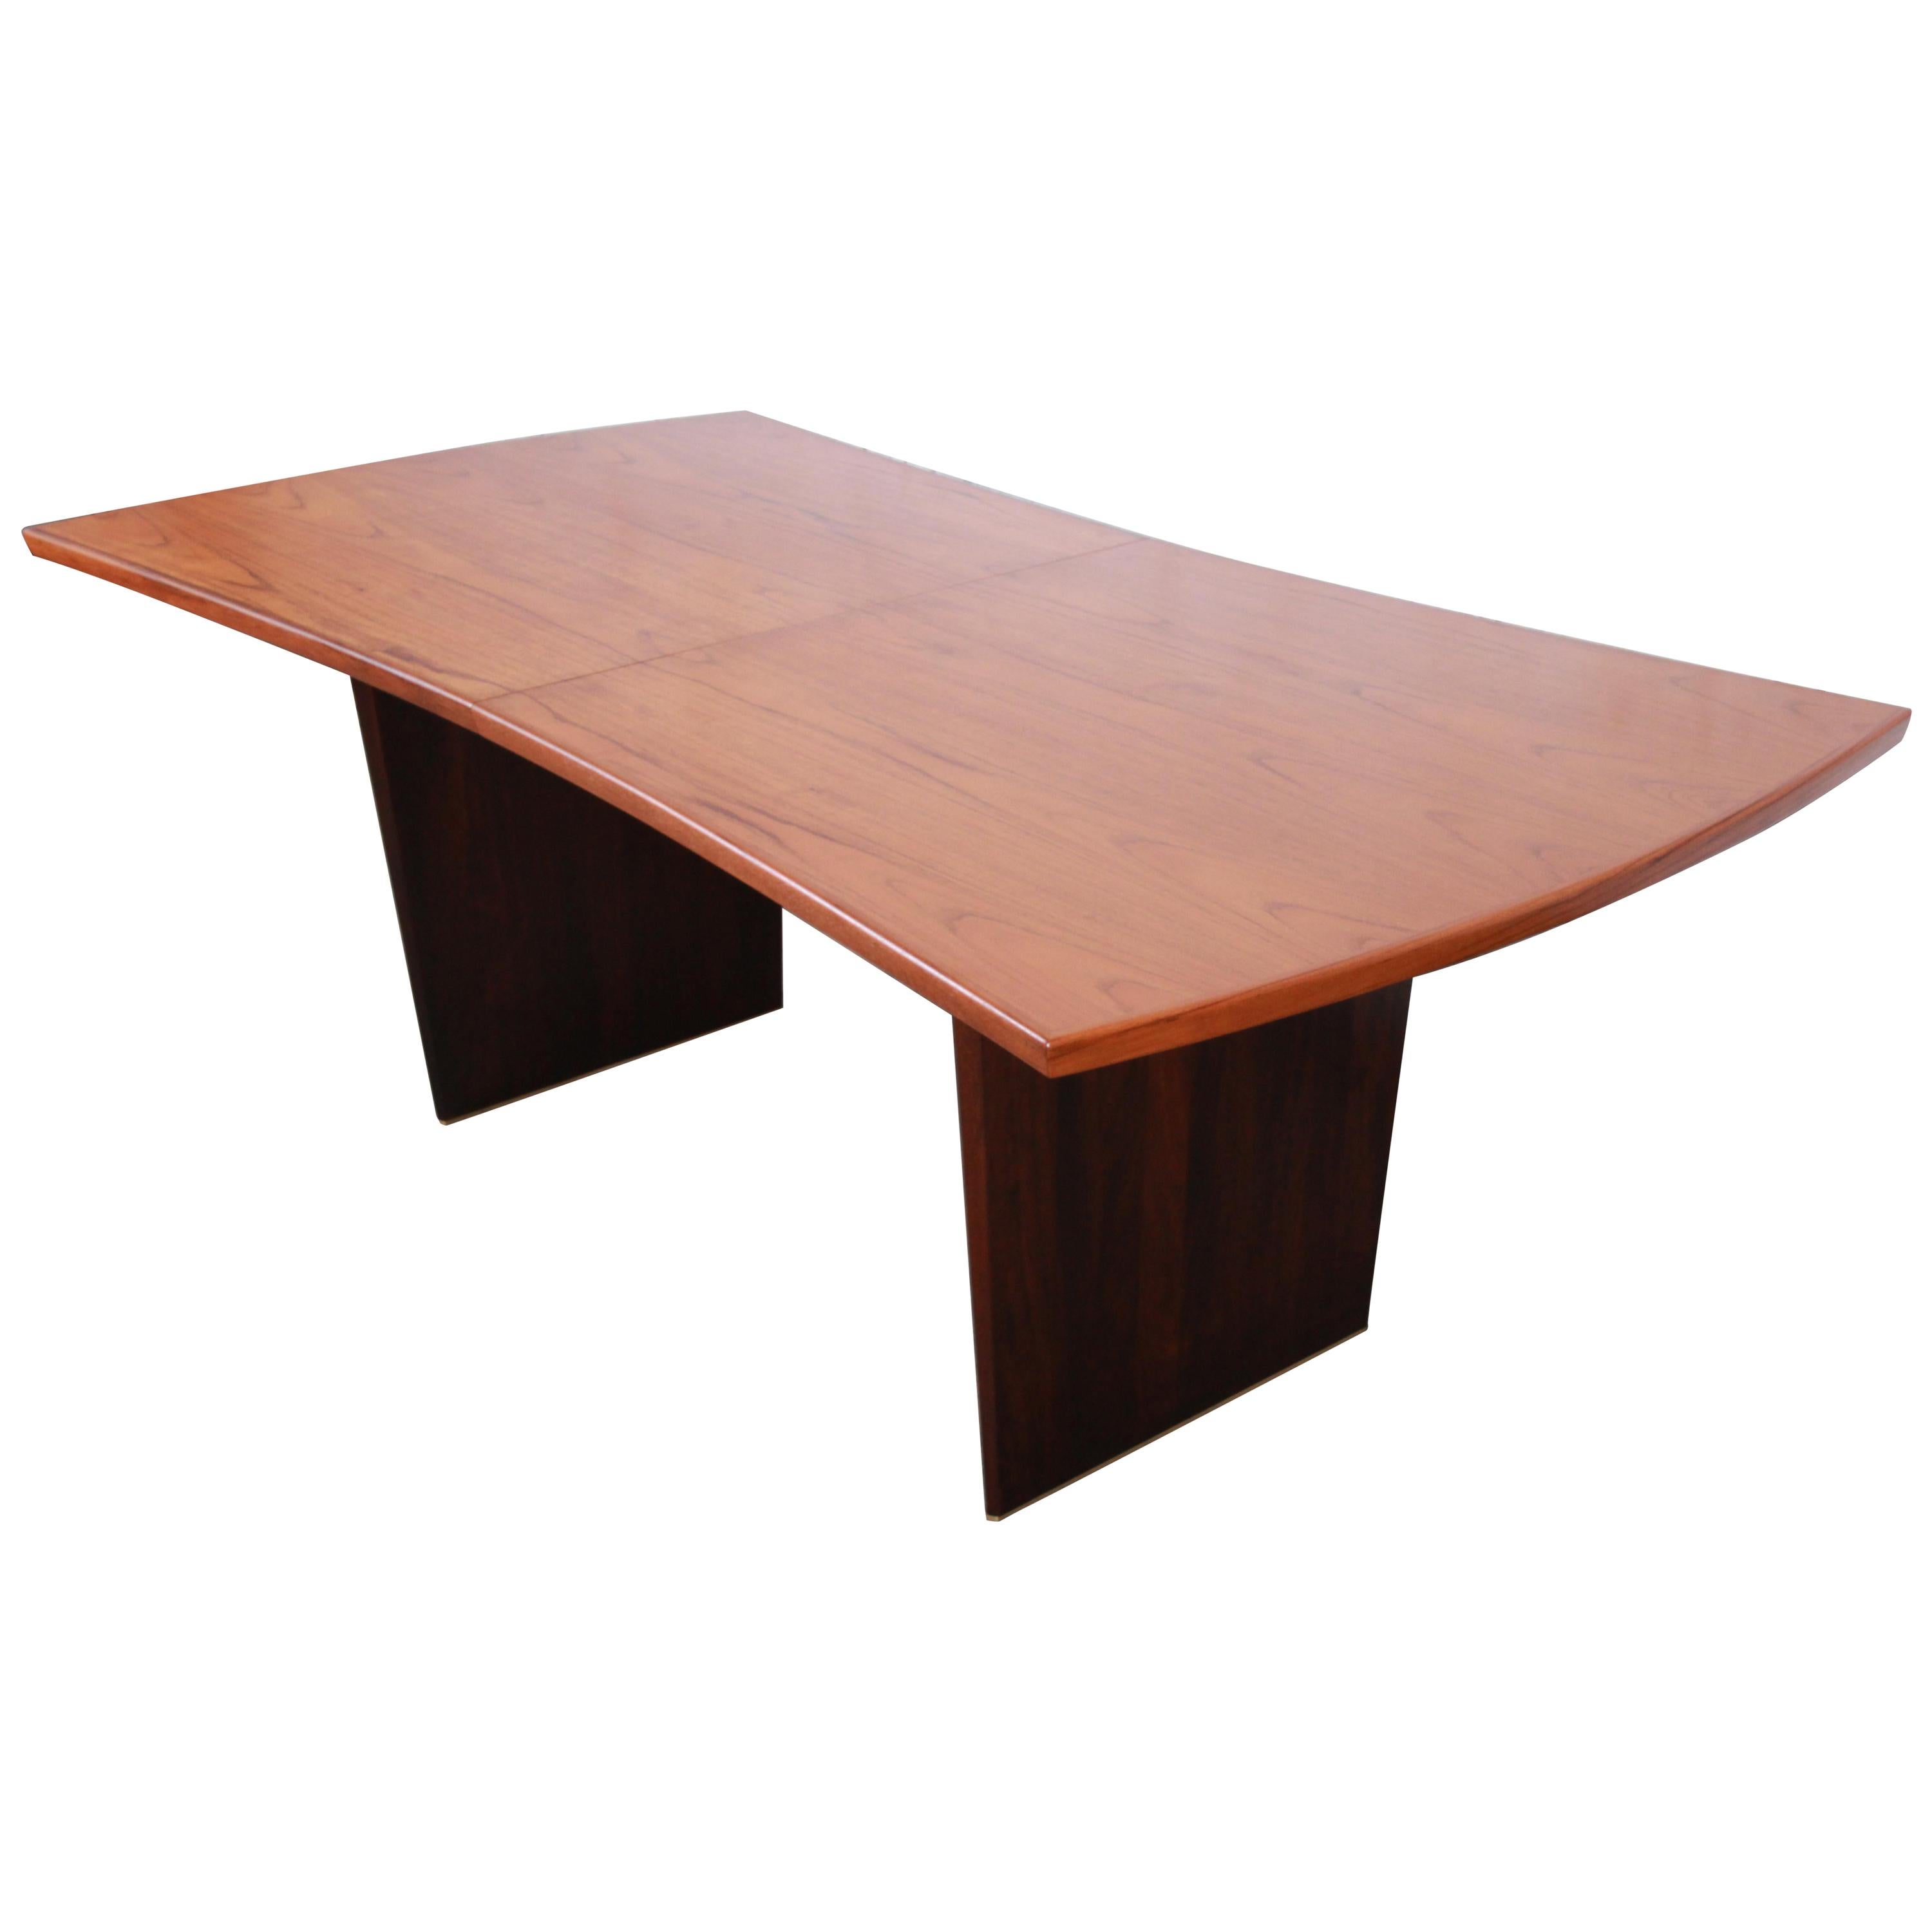 Harvey Probber Mid-Century Modern Teak and Walnut Bow Tie Extension Dining Table